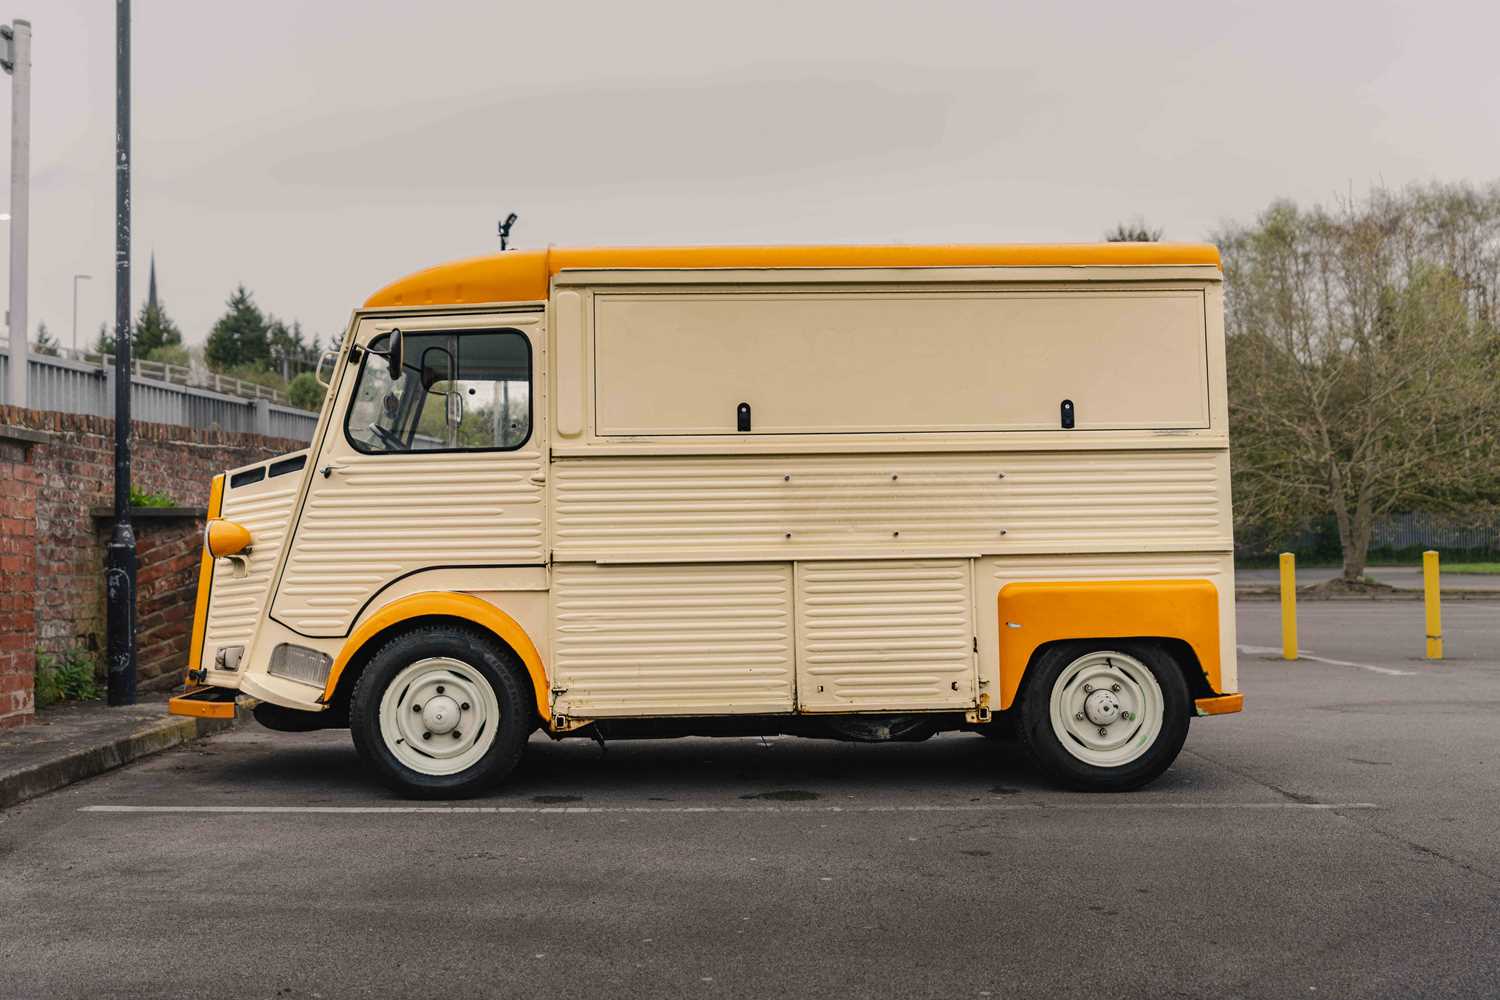 1970 Citroen HY Van Fully fitted-out boutique catering van ready to go into business - Image 6 of 59